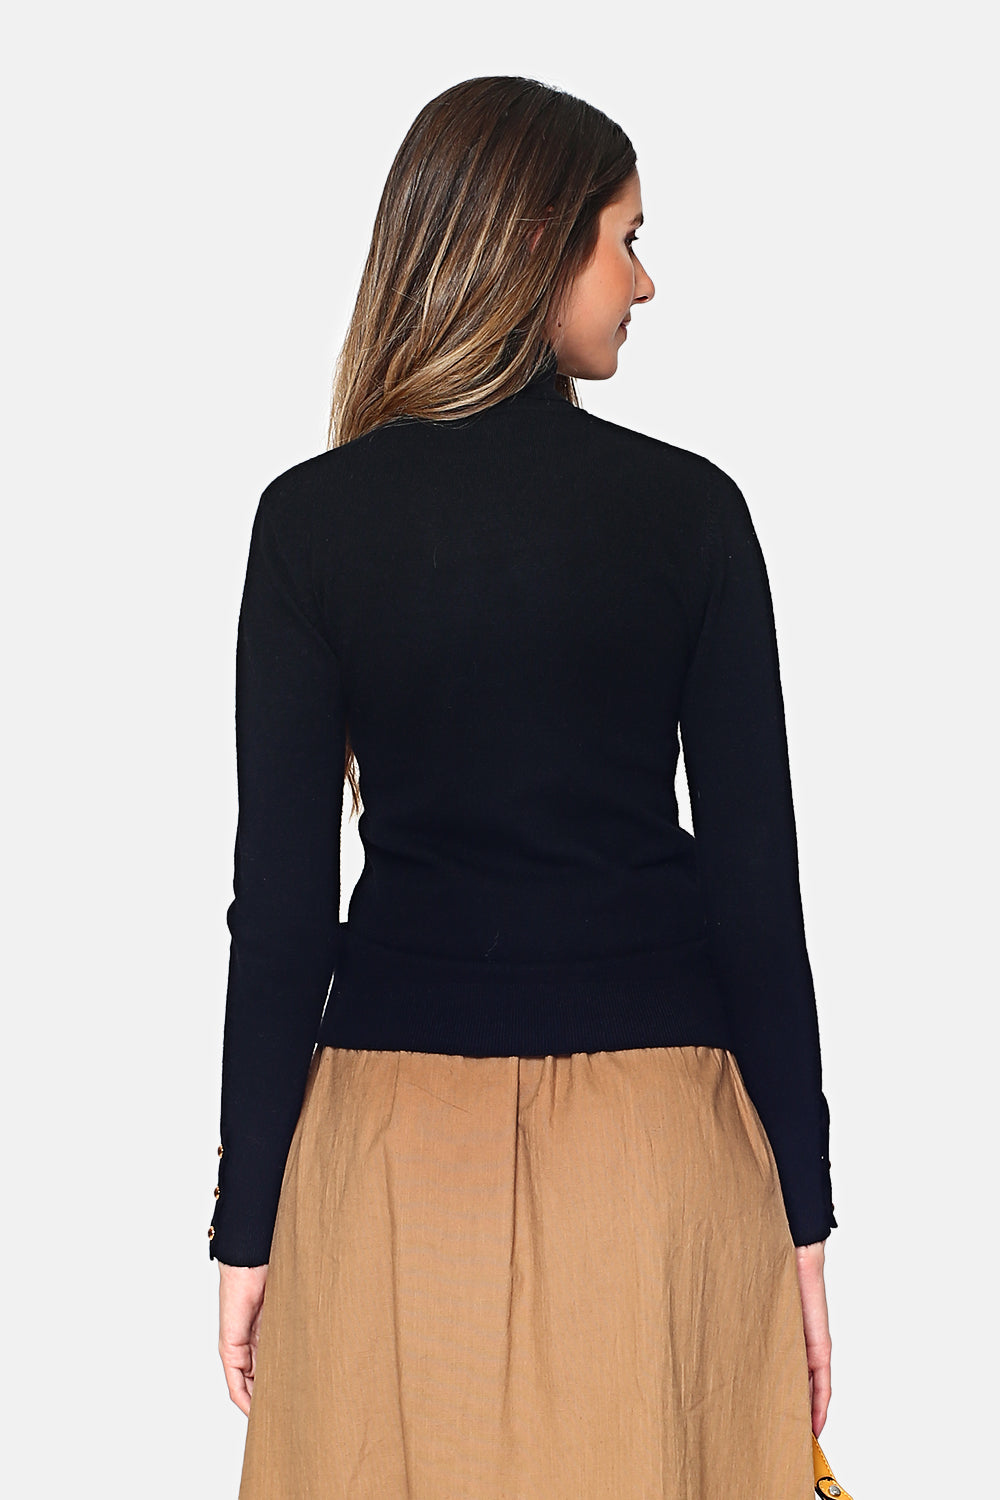 TURTLENECK SWEATER WITH GOLDEN BUTTONS ON CUFFS